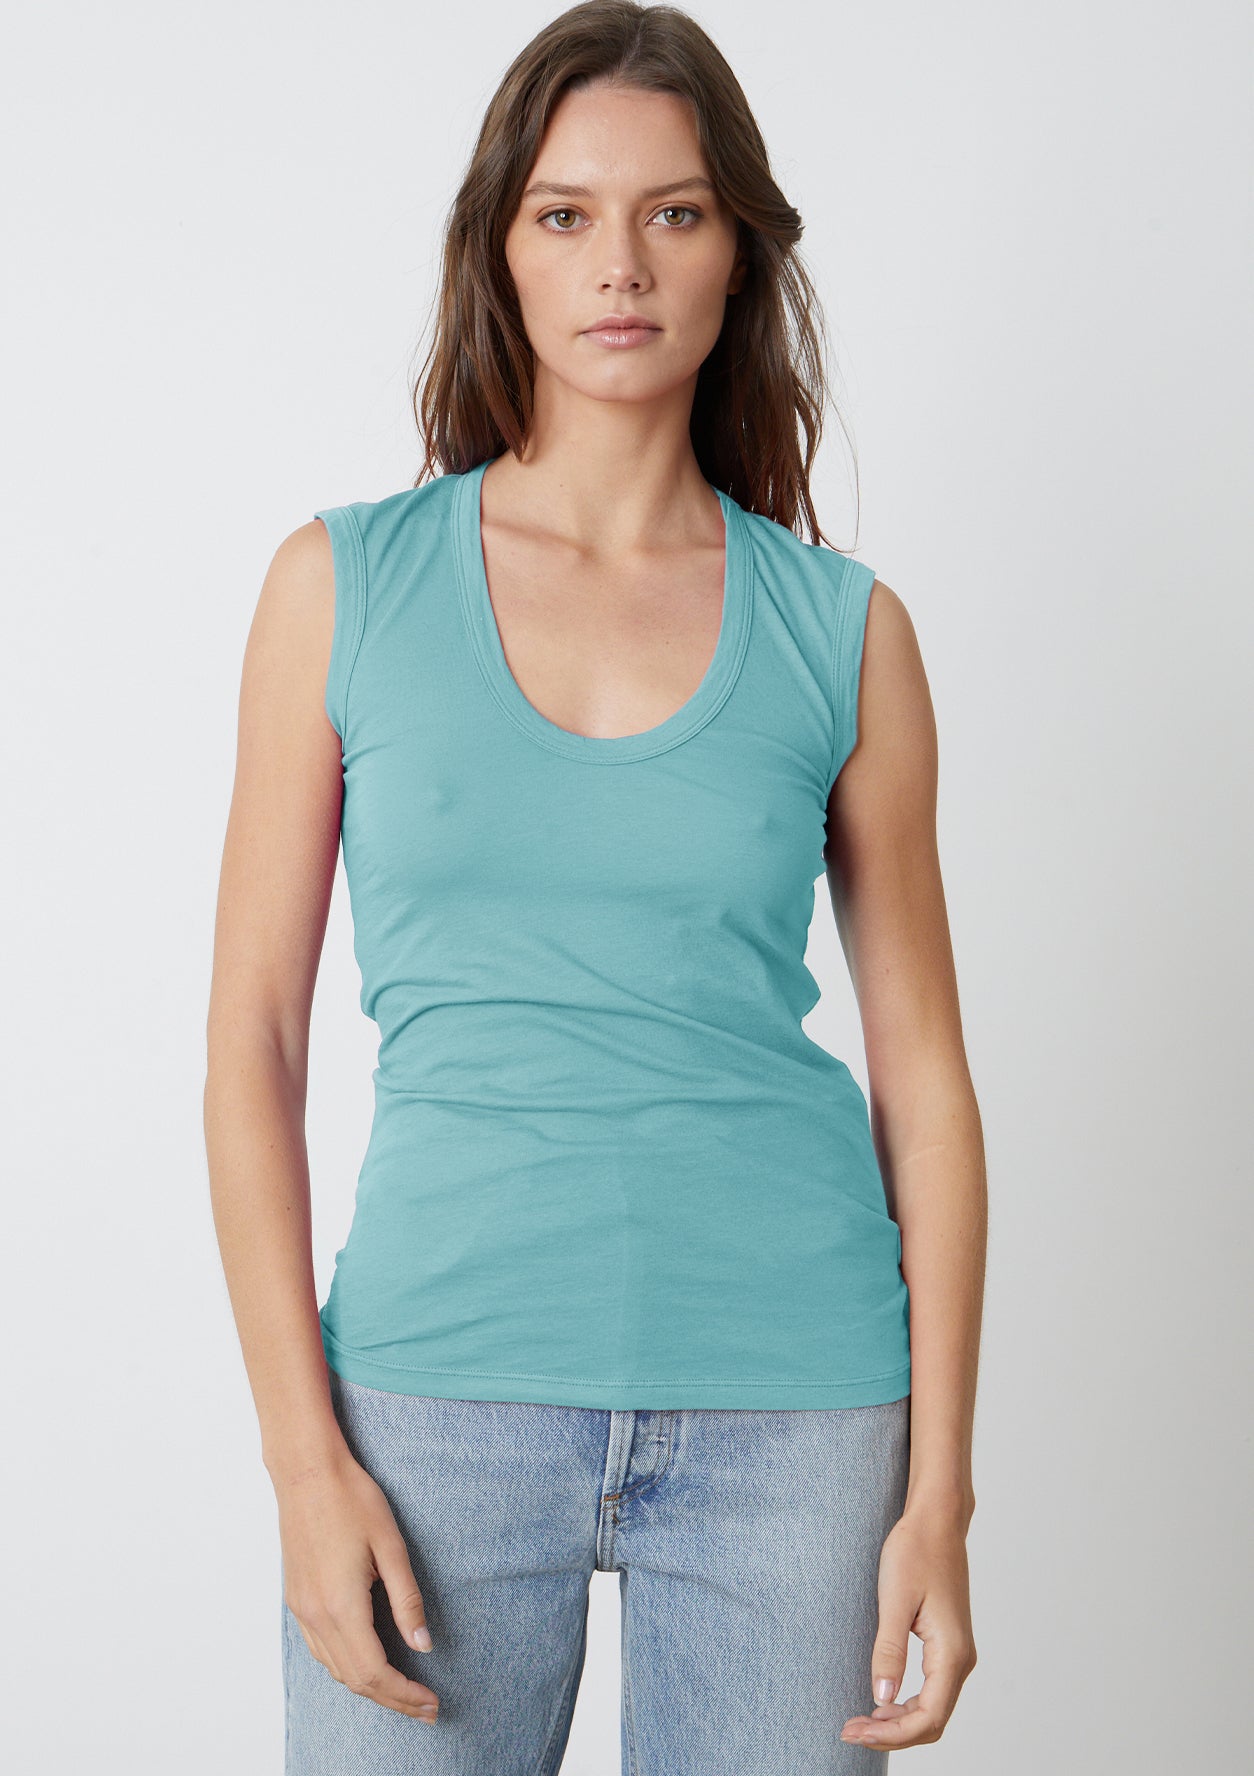 A woman wearing a Velvet by Graham & Spencer ESTINA GAUZY WHISPER FITTED TANK TOP.